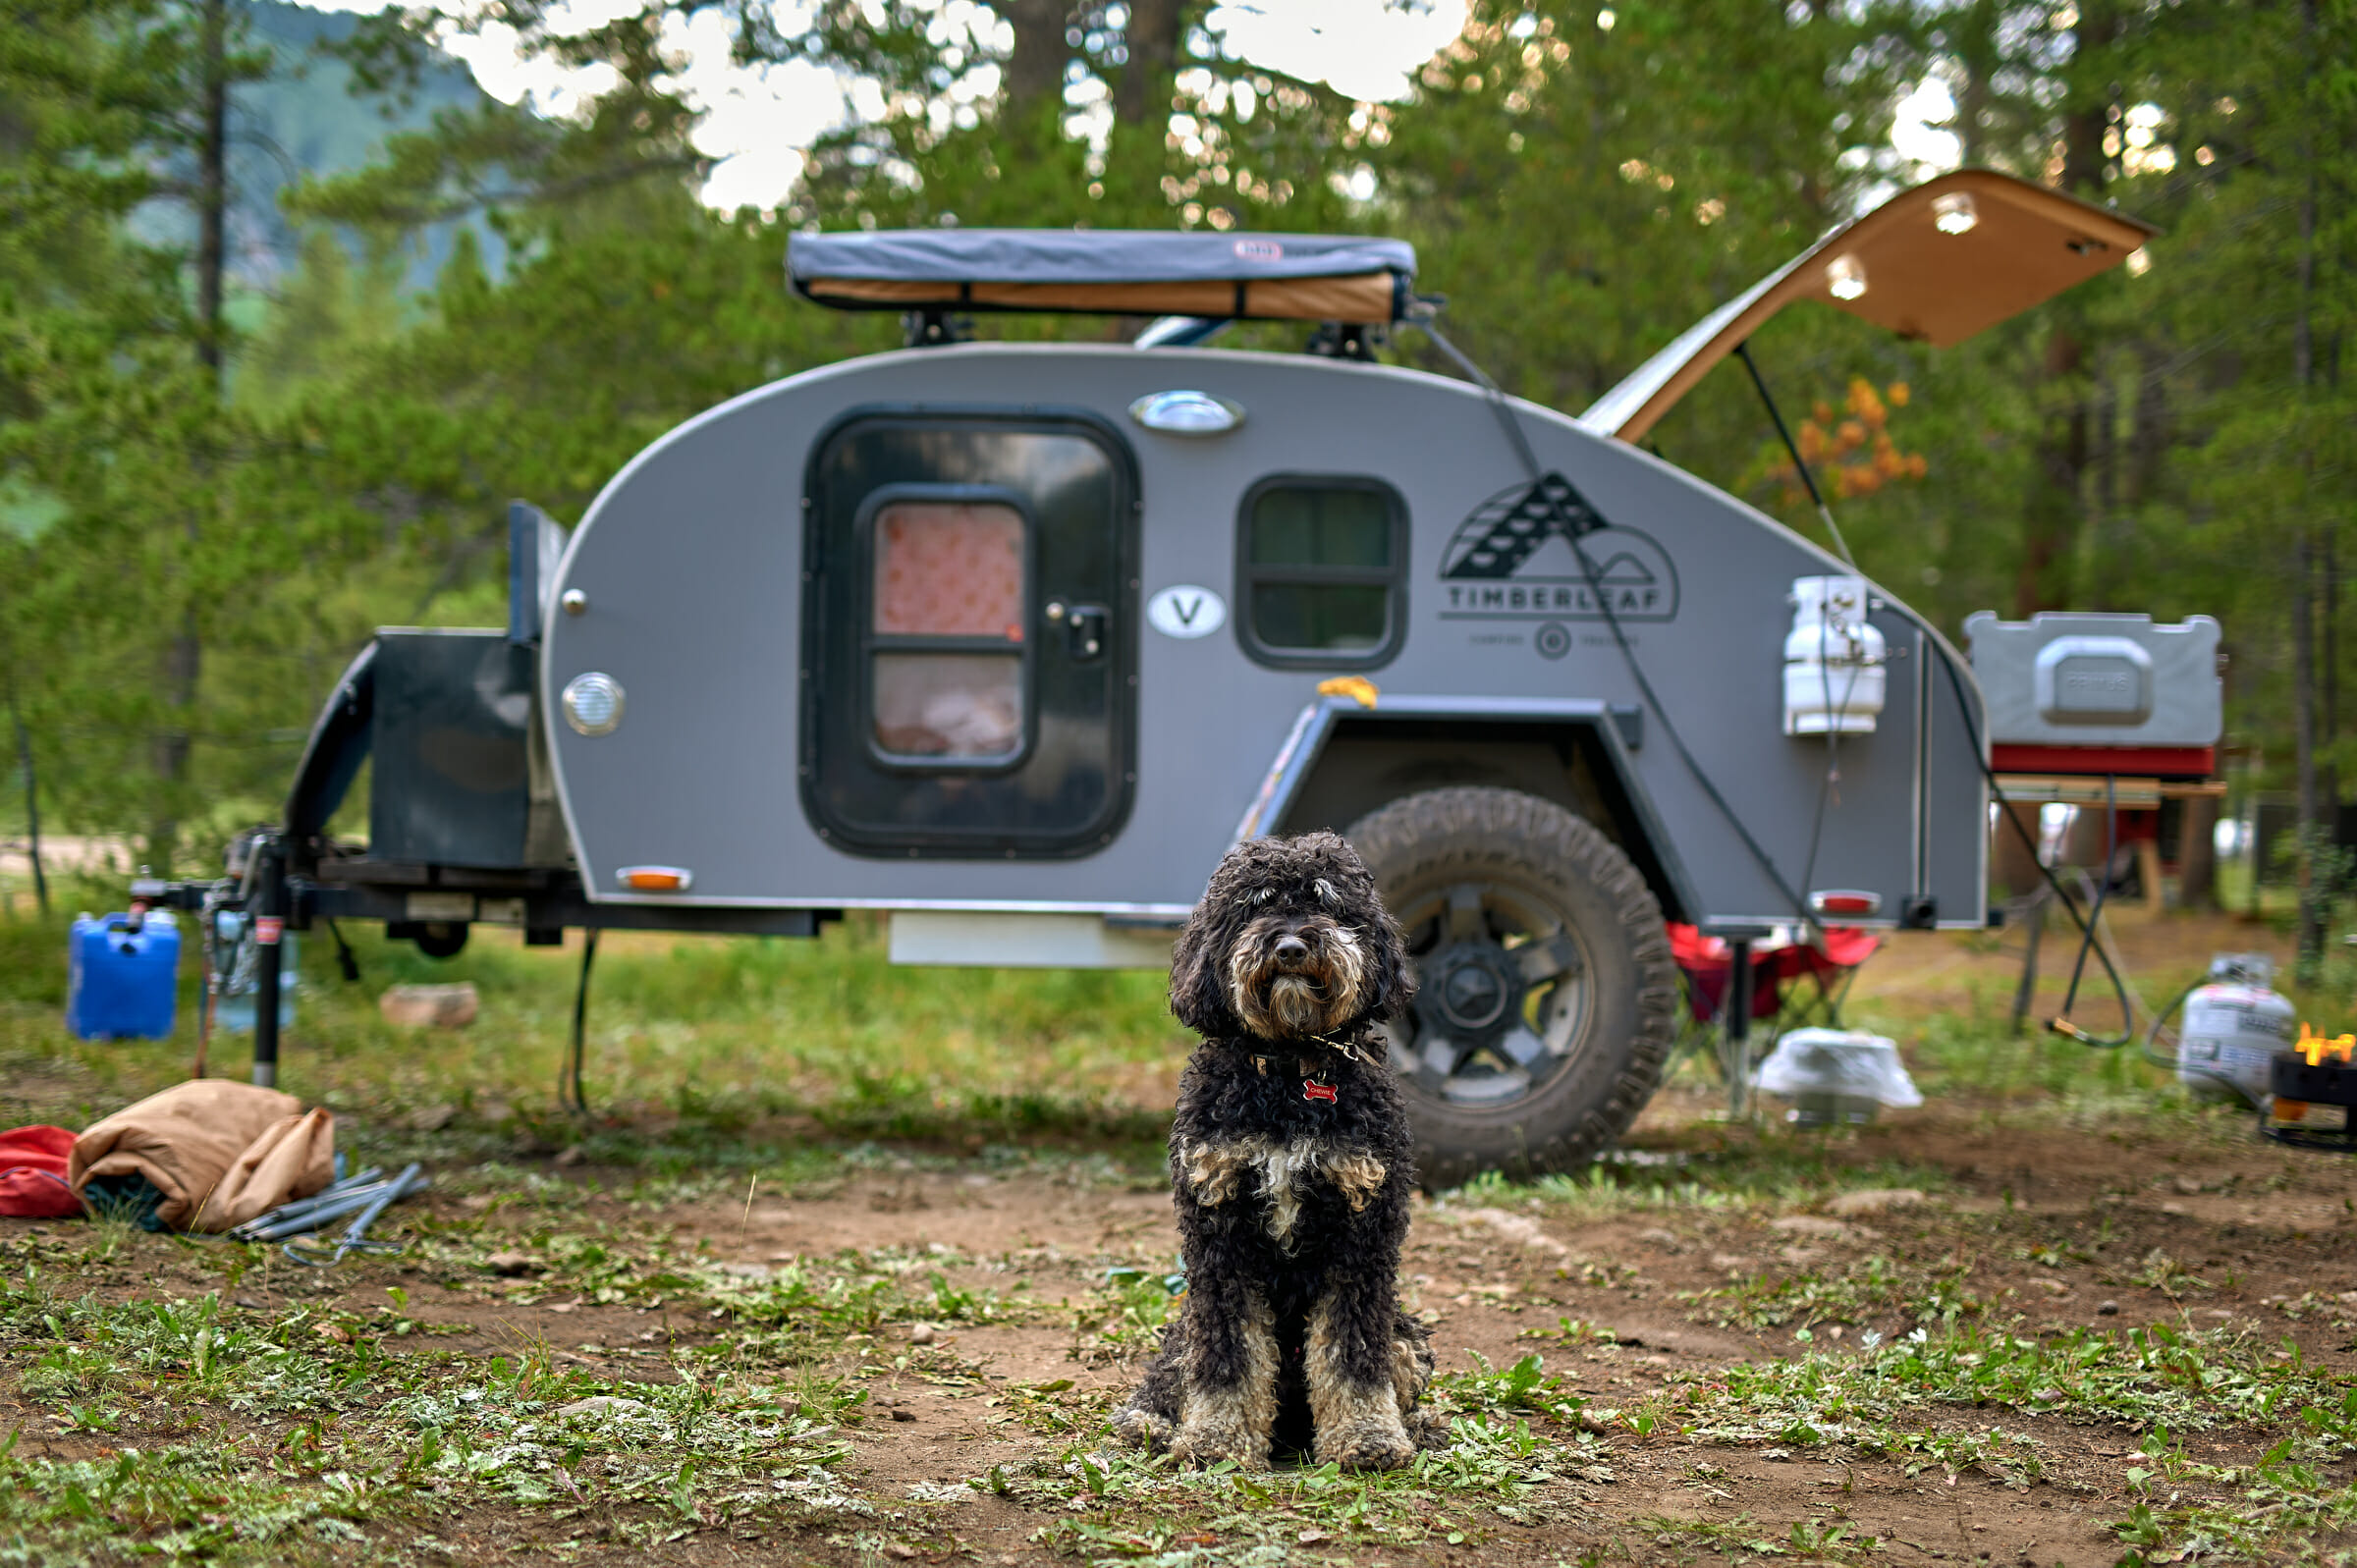 Camping With Dogs in A Teardrop Trailer